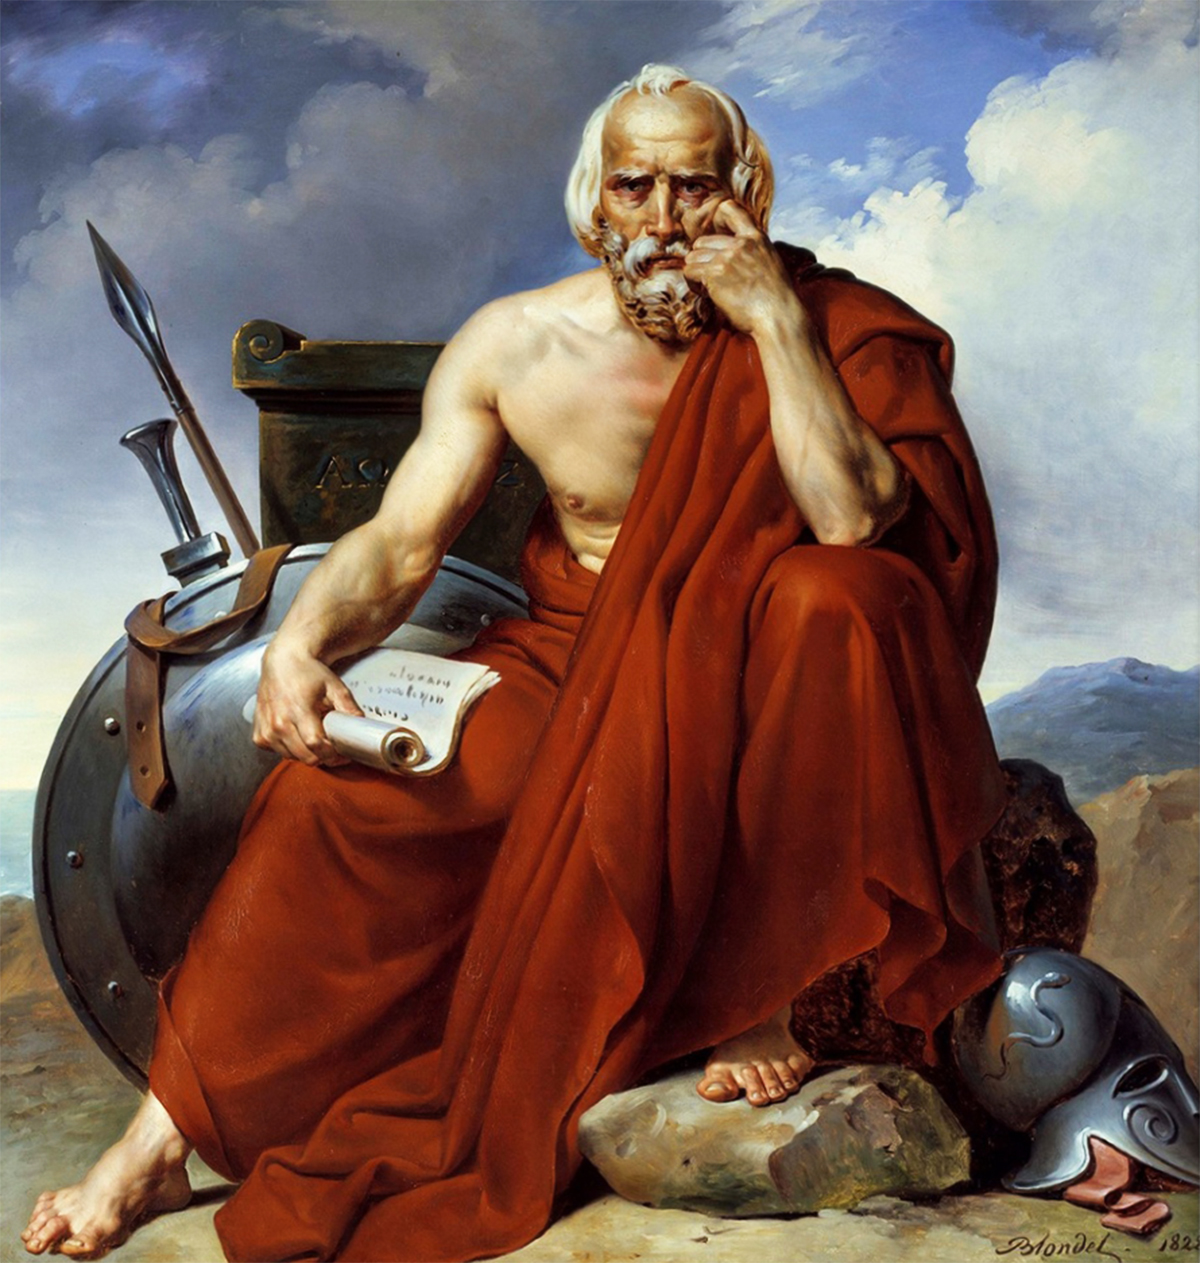 A painting of Lycurgus, the ancient legislator of Sparta, created by Merry Joseph Blondel in 1828. Lycurgus is depicted as an elderly, bearded man with a contemplative expression, wearing a deep red robe. He sits on a rock, holding a scroll inscribed with Greek text in one hand. Beside him are symbols of warfare and Sparta: a bronze shield, a helmet, and a spear. A dramatic sky with clouds forms the background.